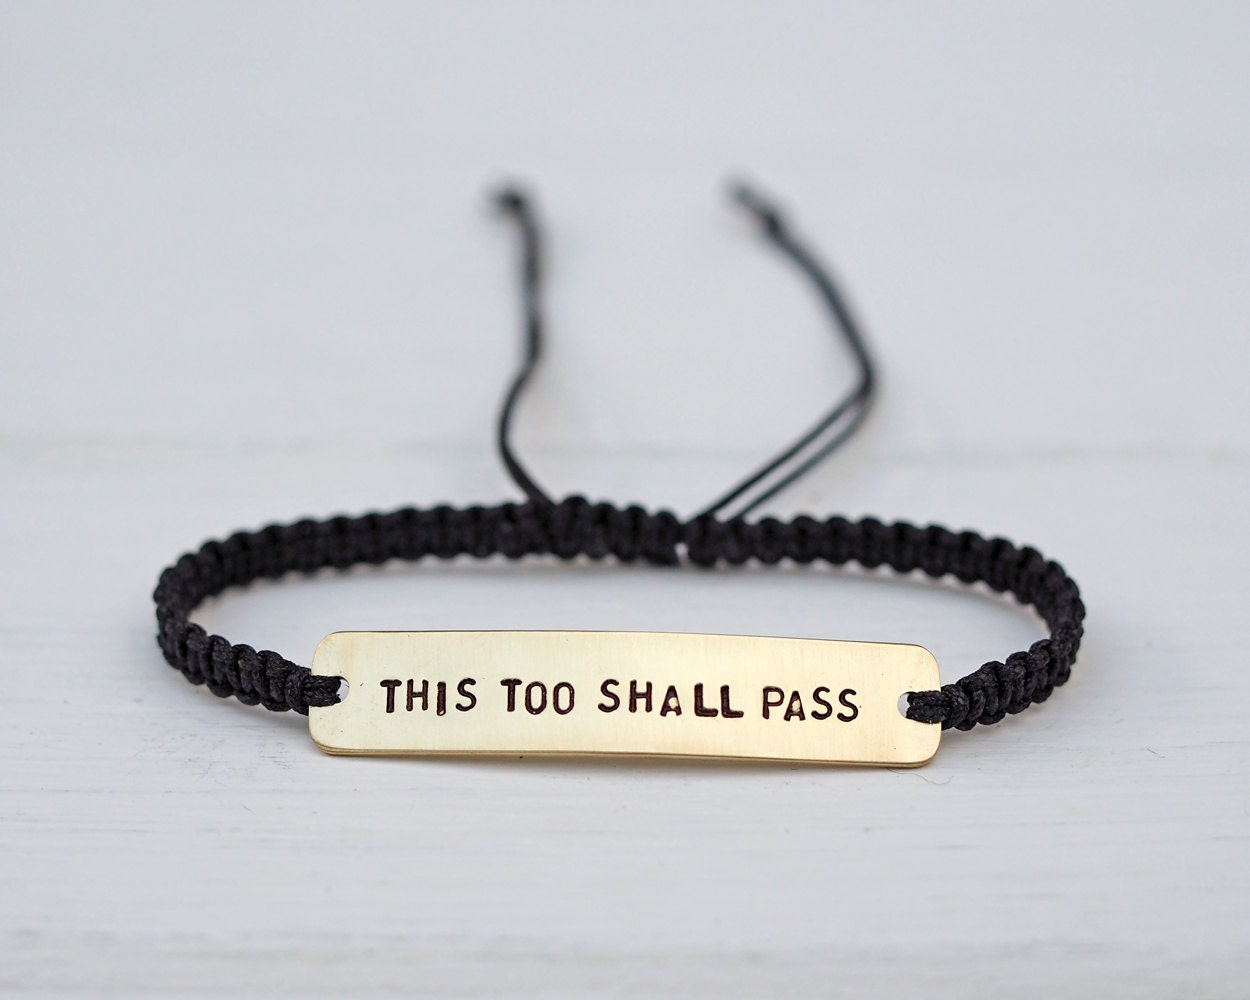 This Too Shall Pass (17-3cm) Bracelet with Spring Lock